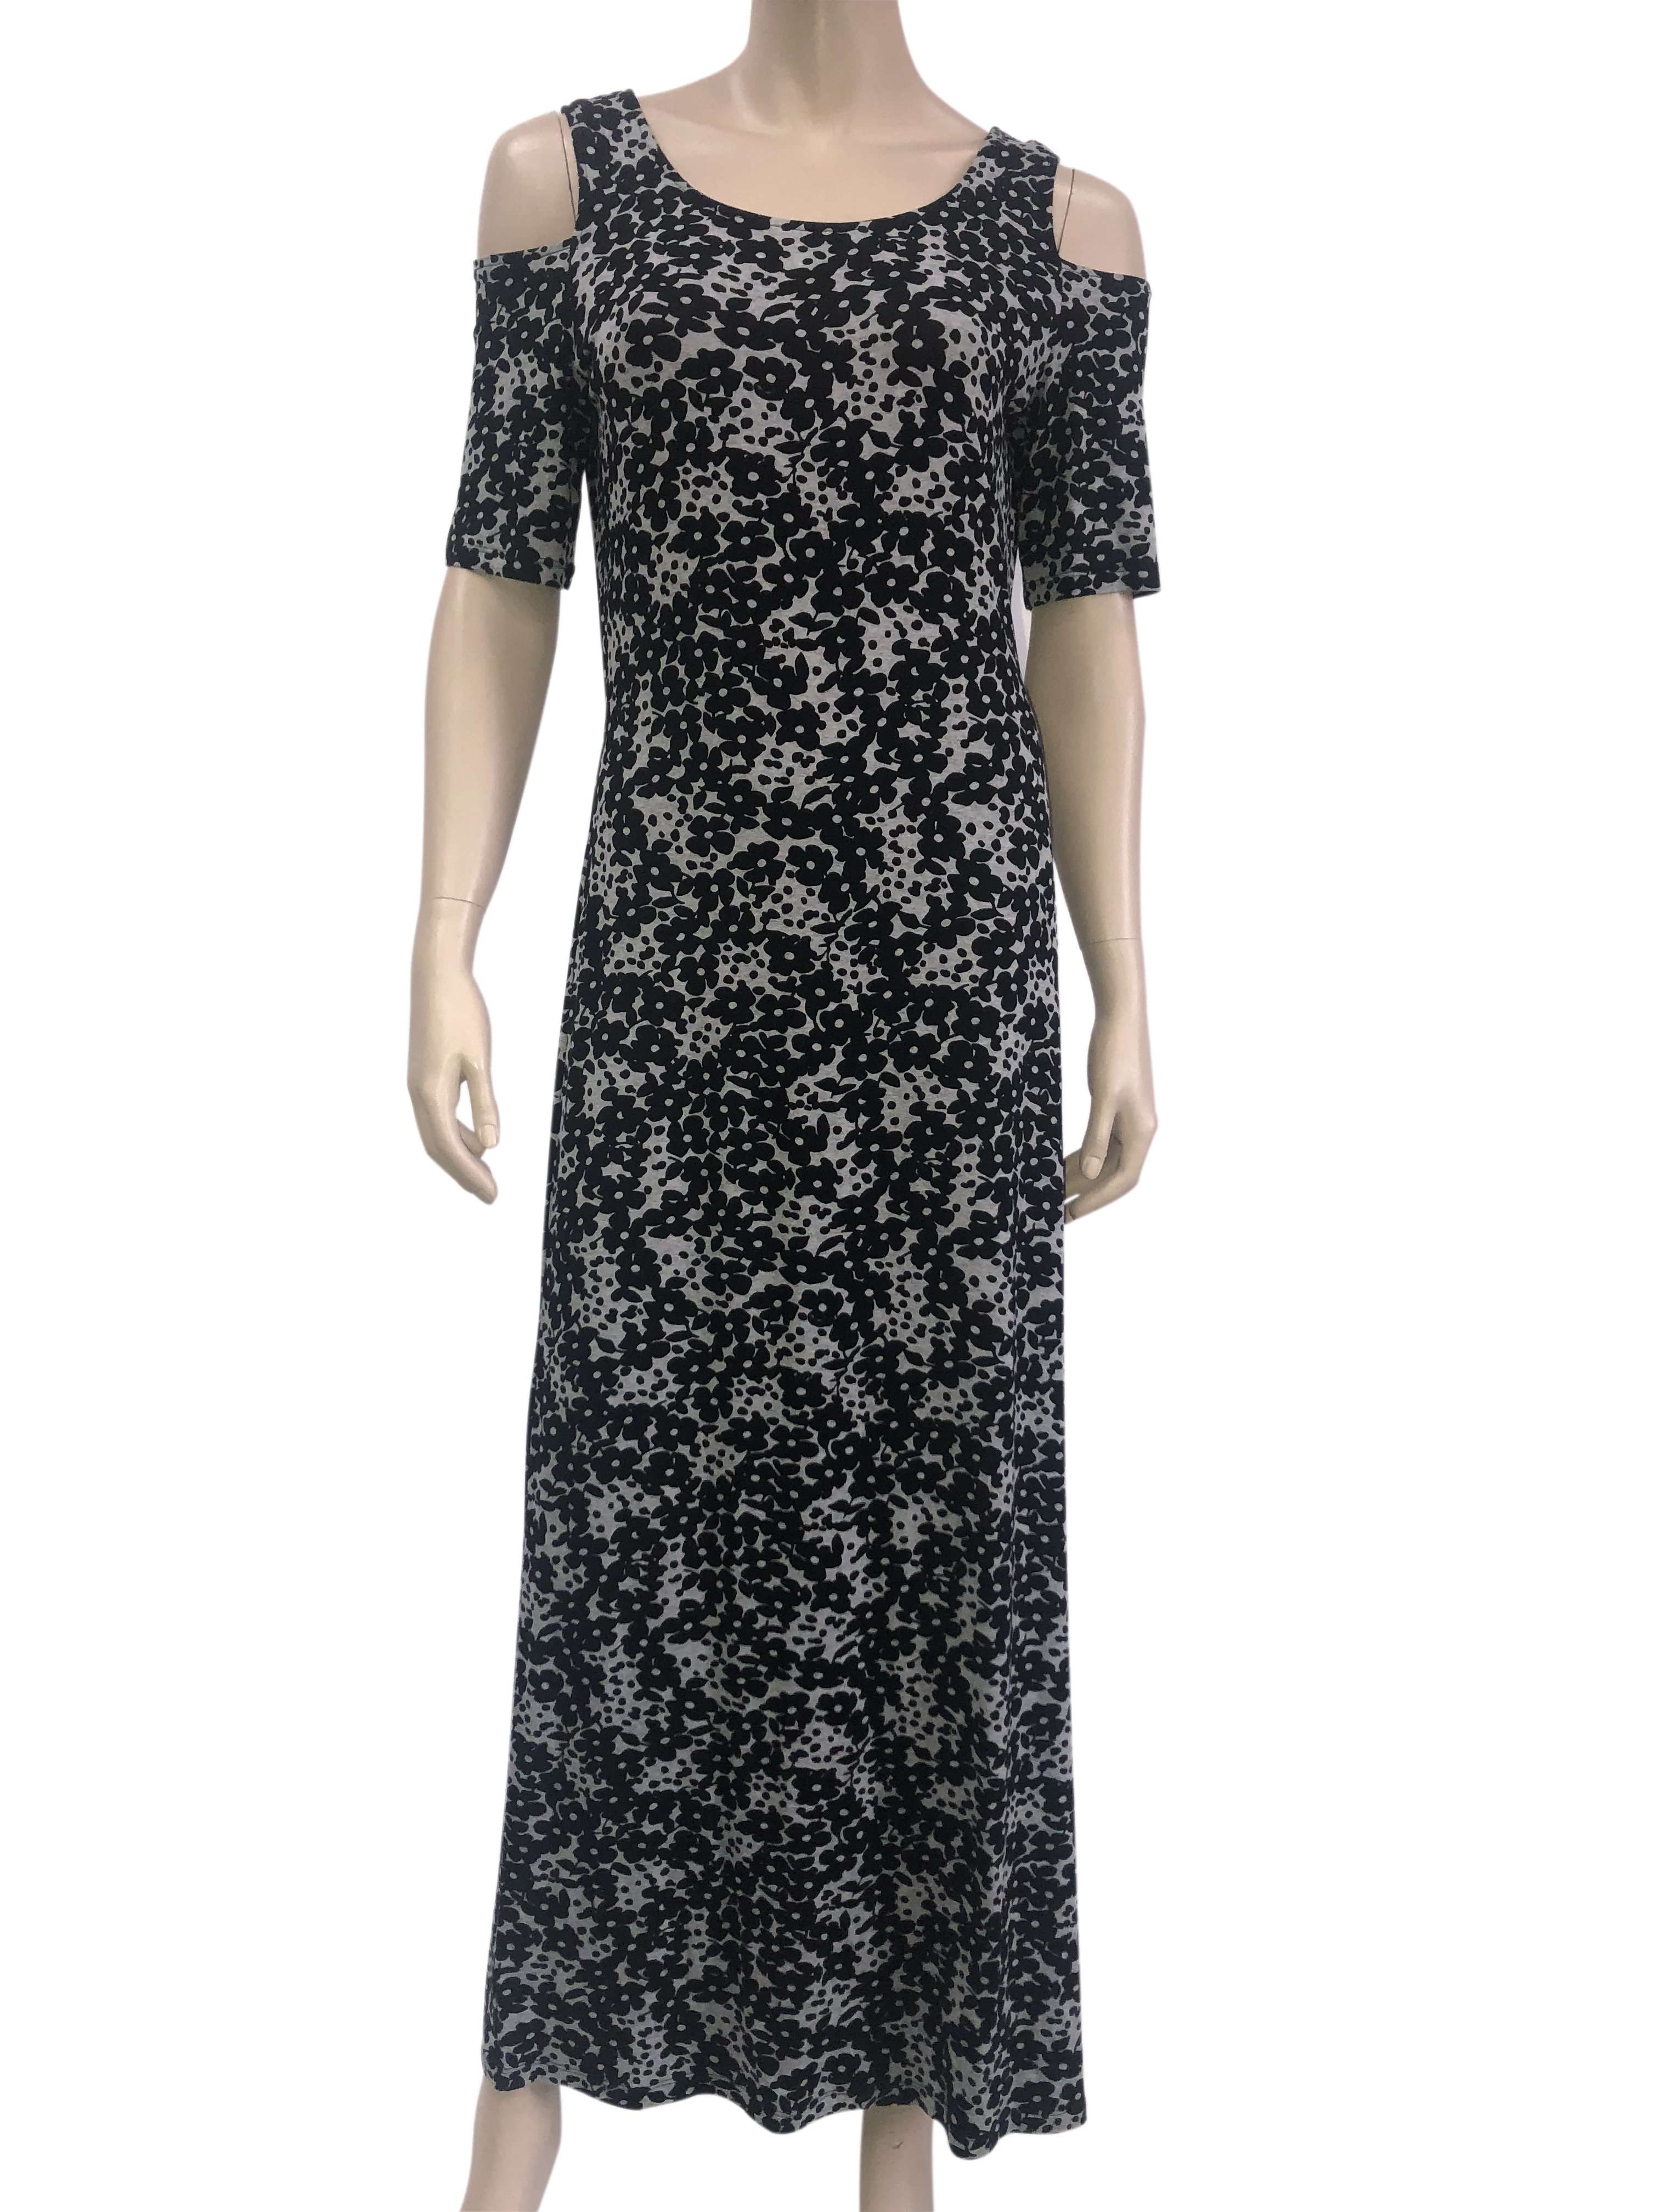 Women's Long Dress On Sale Canada Soft Stretch Fabric Comfort Fit Grey and Black Print Yvonne Marie Boutiques - Yvonne Marie - Yvonne Marie